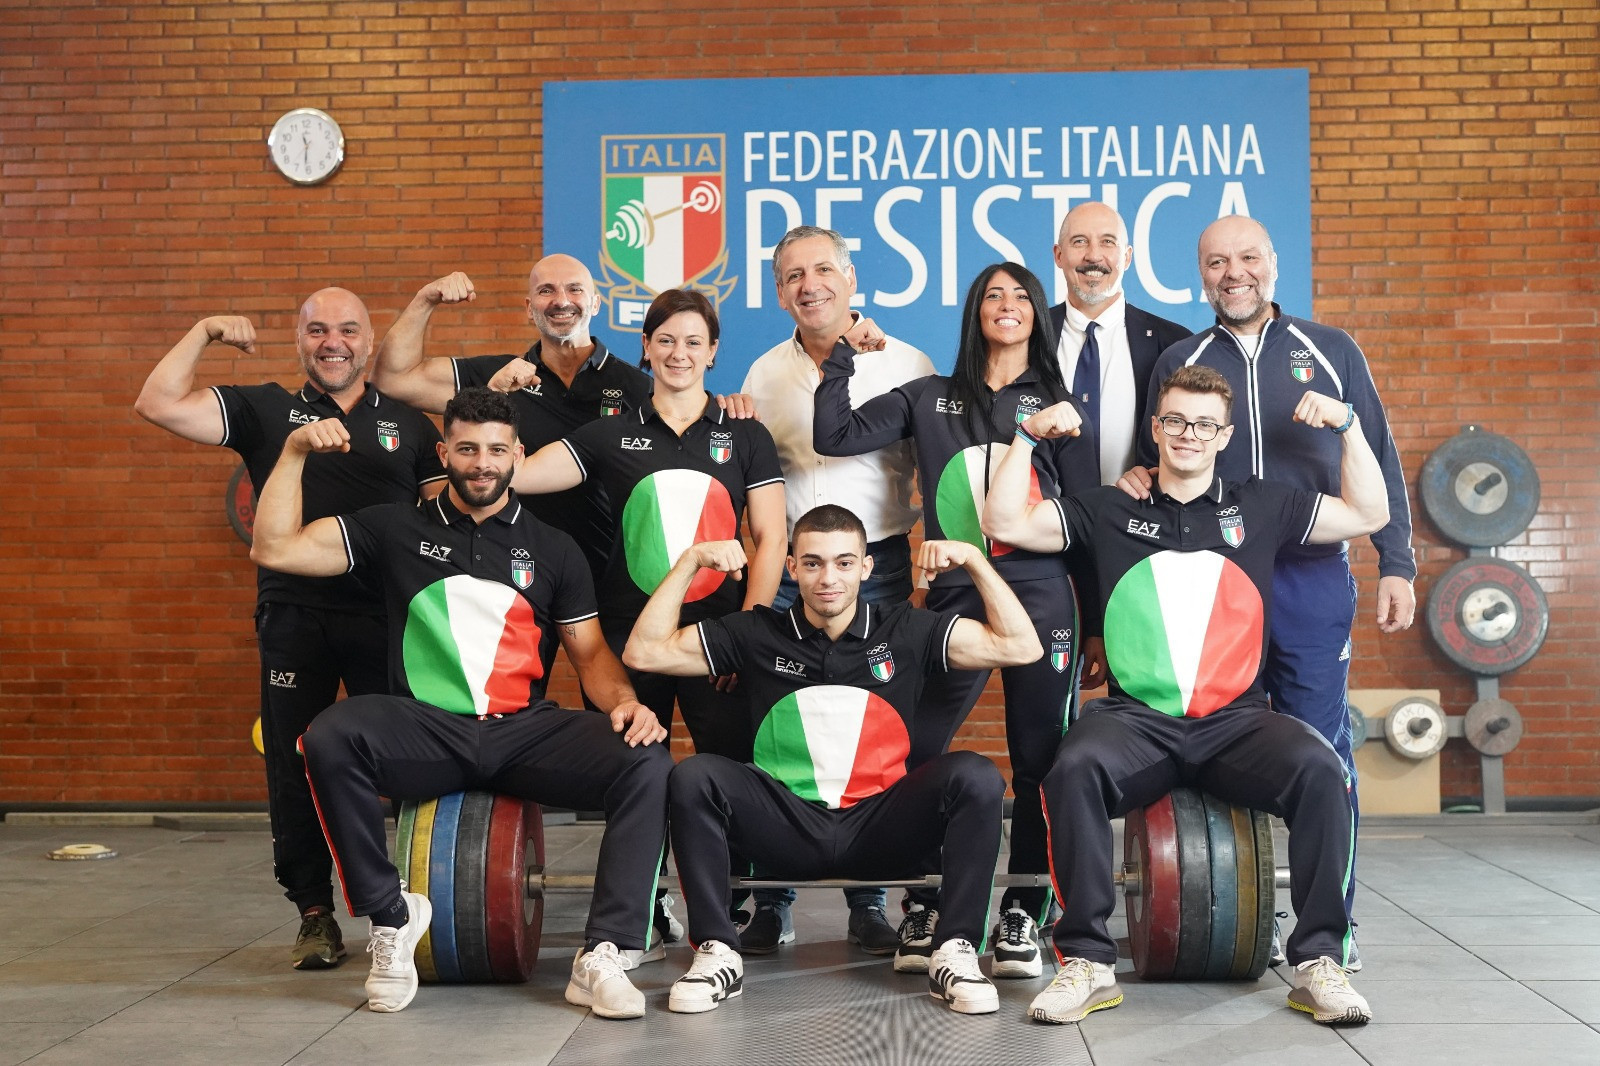 Antonio Urso, in white, has been given a Gold Collar by CONI for his service to weightlifting ©Facebook/FIPE